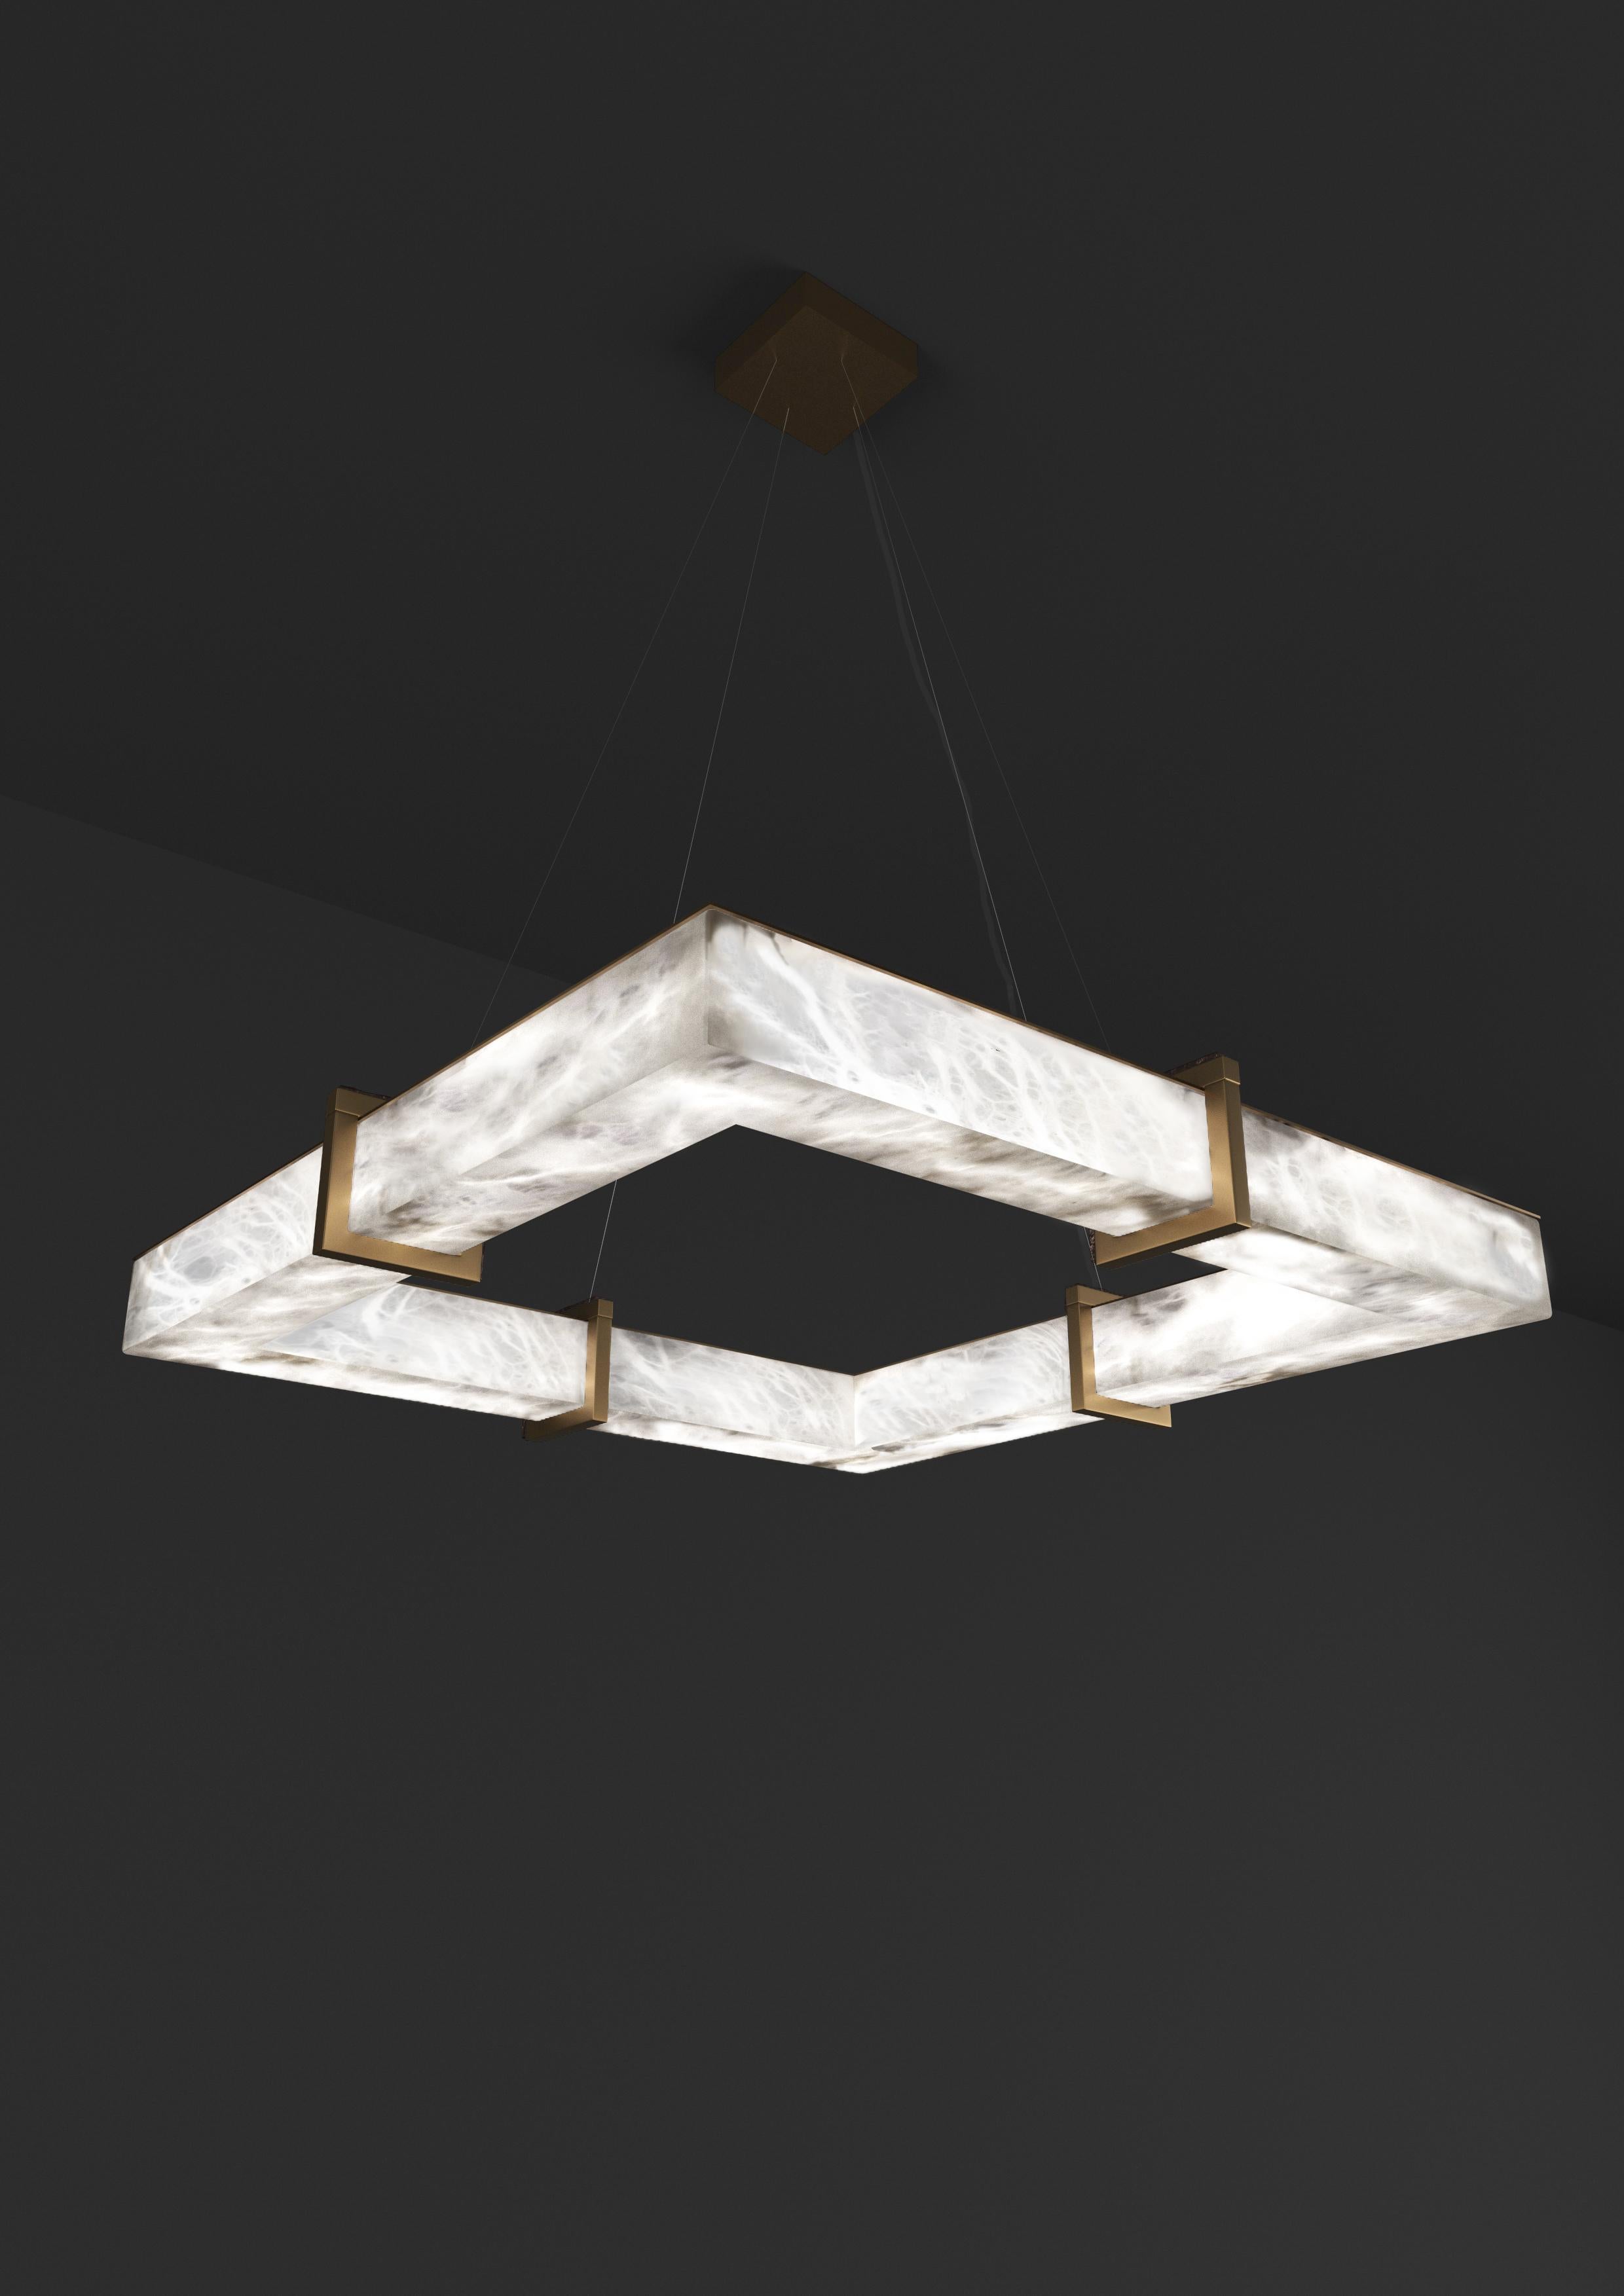 Talassa Bronze Pendant Lamp by Alabastro Italiano
Dimensions: D 80 x W 80 x H 11 cm.
Materials: White alabaster and bronze.

Available in different finishes: Shiny Silver, Bronze, Brushed Brass, Ruggine of Florence, Brushed Burnished, Shiny Gold,